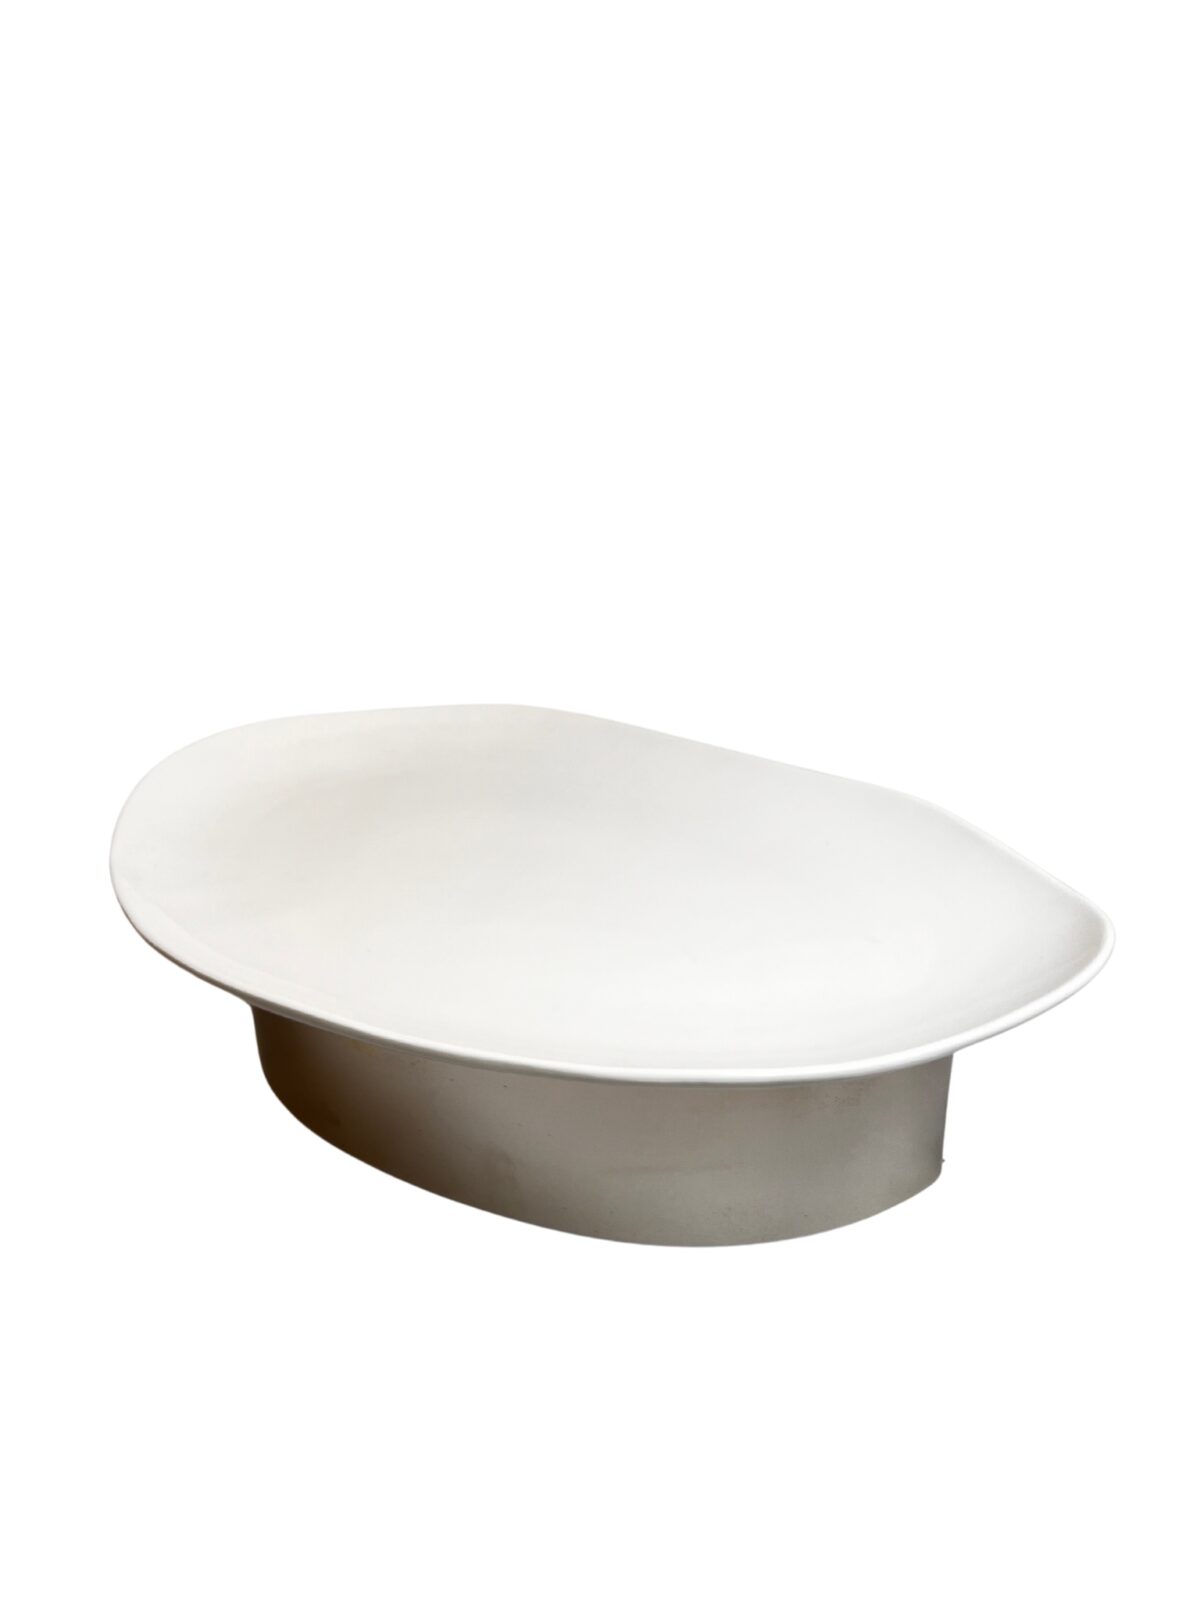 Rabwa,Stand,Large,Porcelain,Plate,servingplate